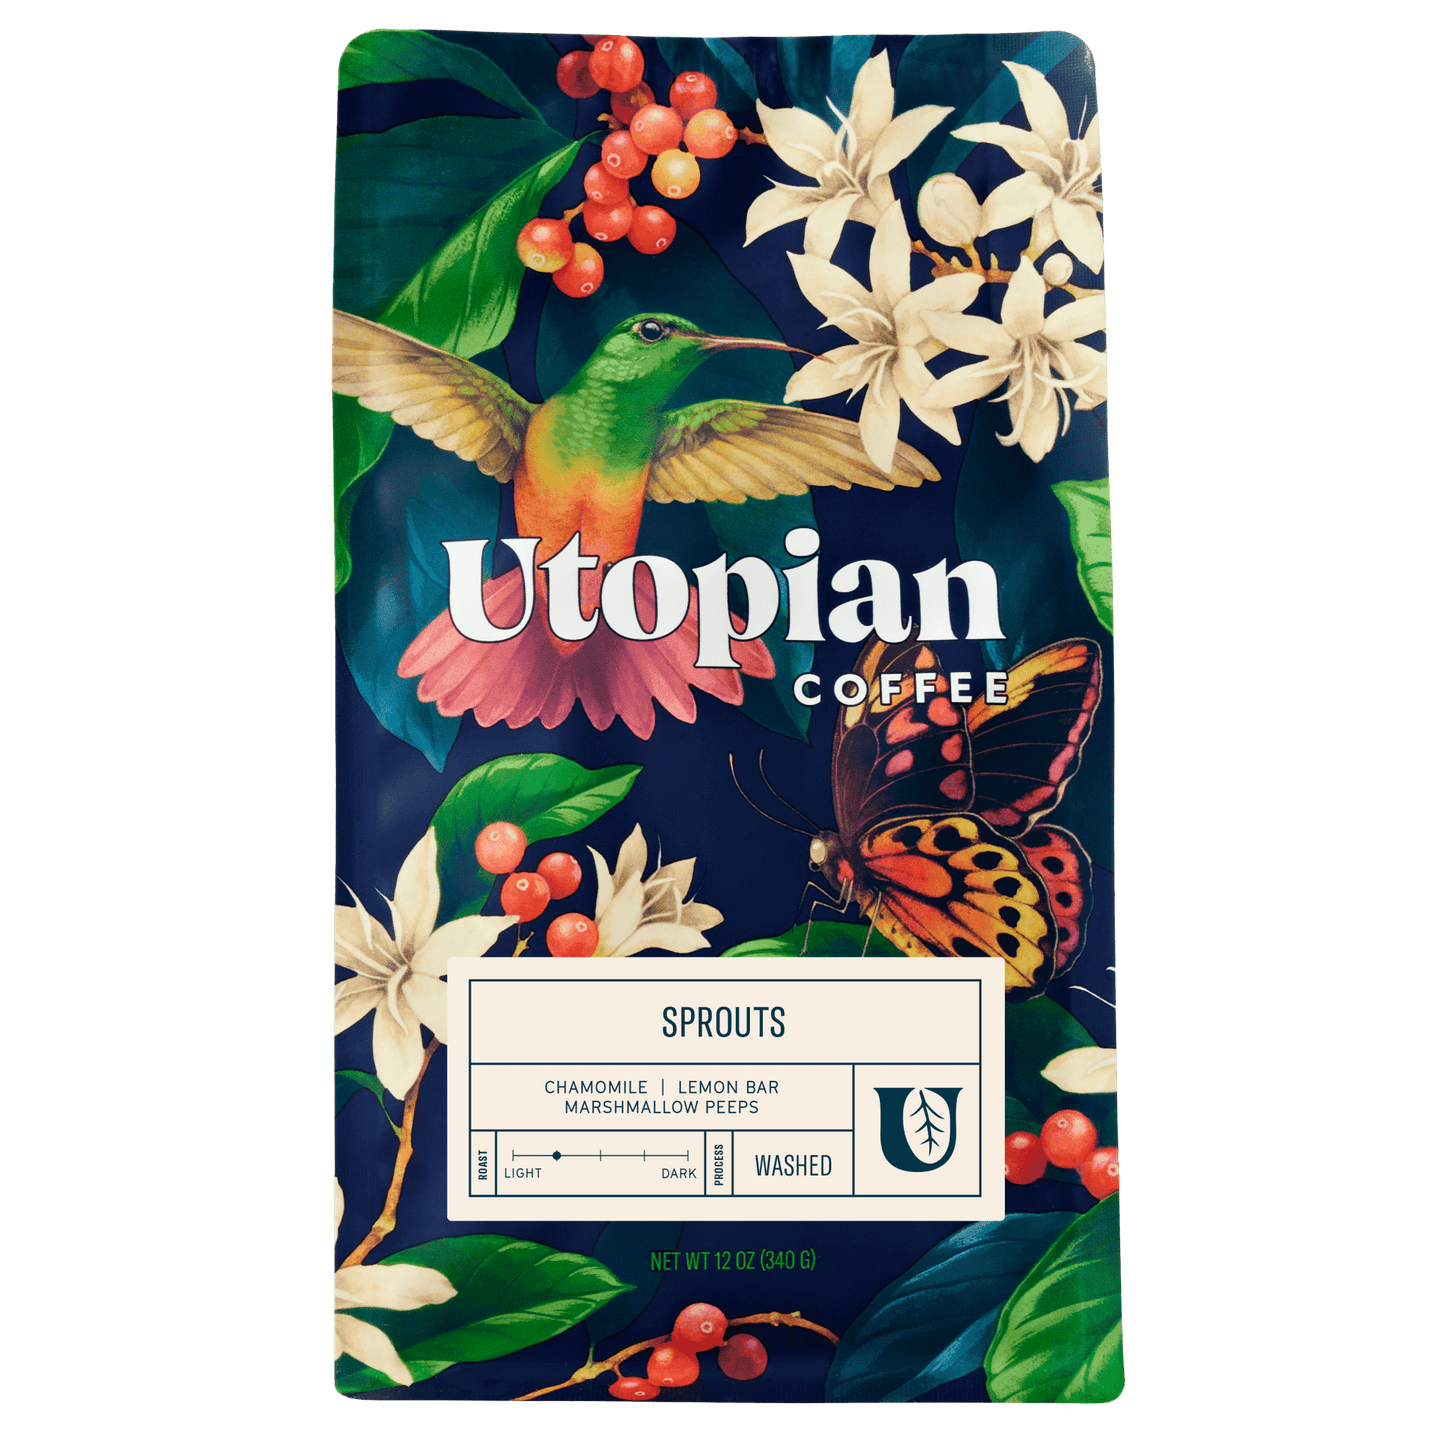 Sprouts - Utopian Coffee